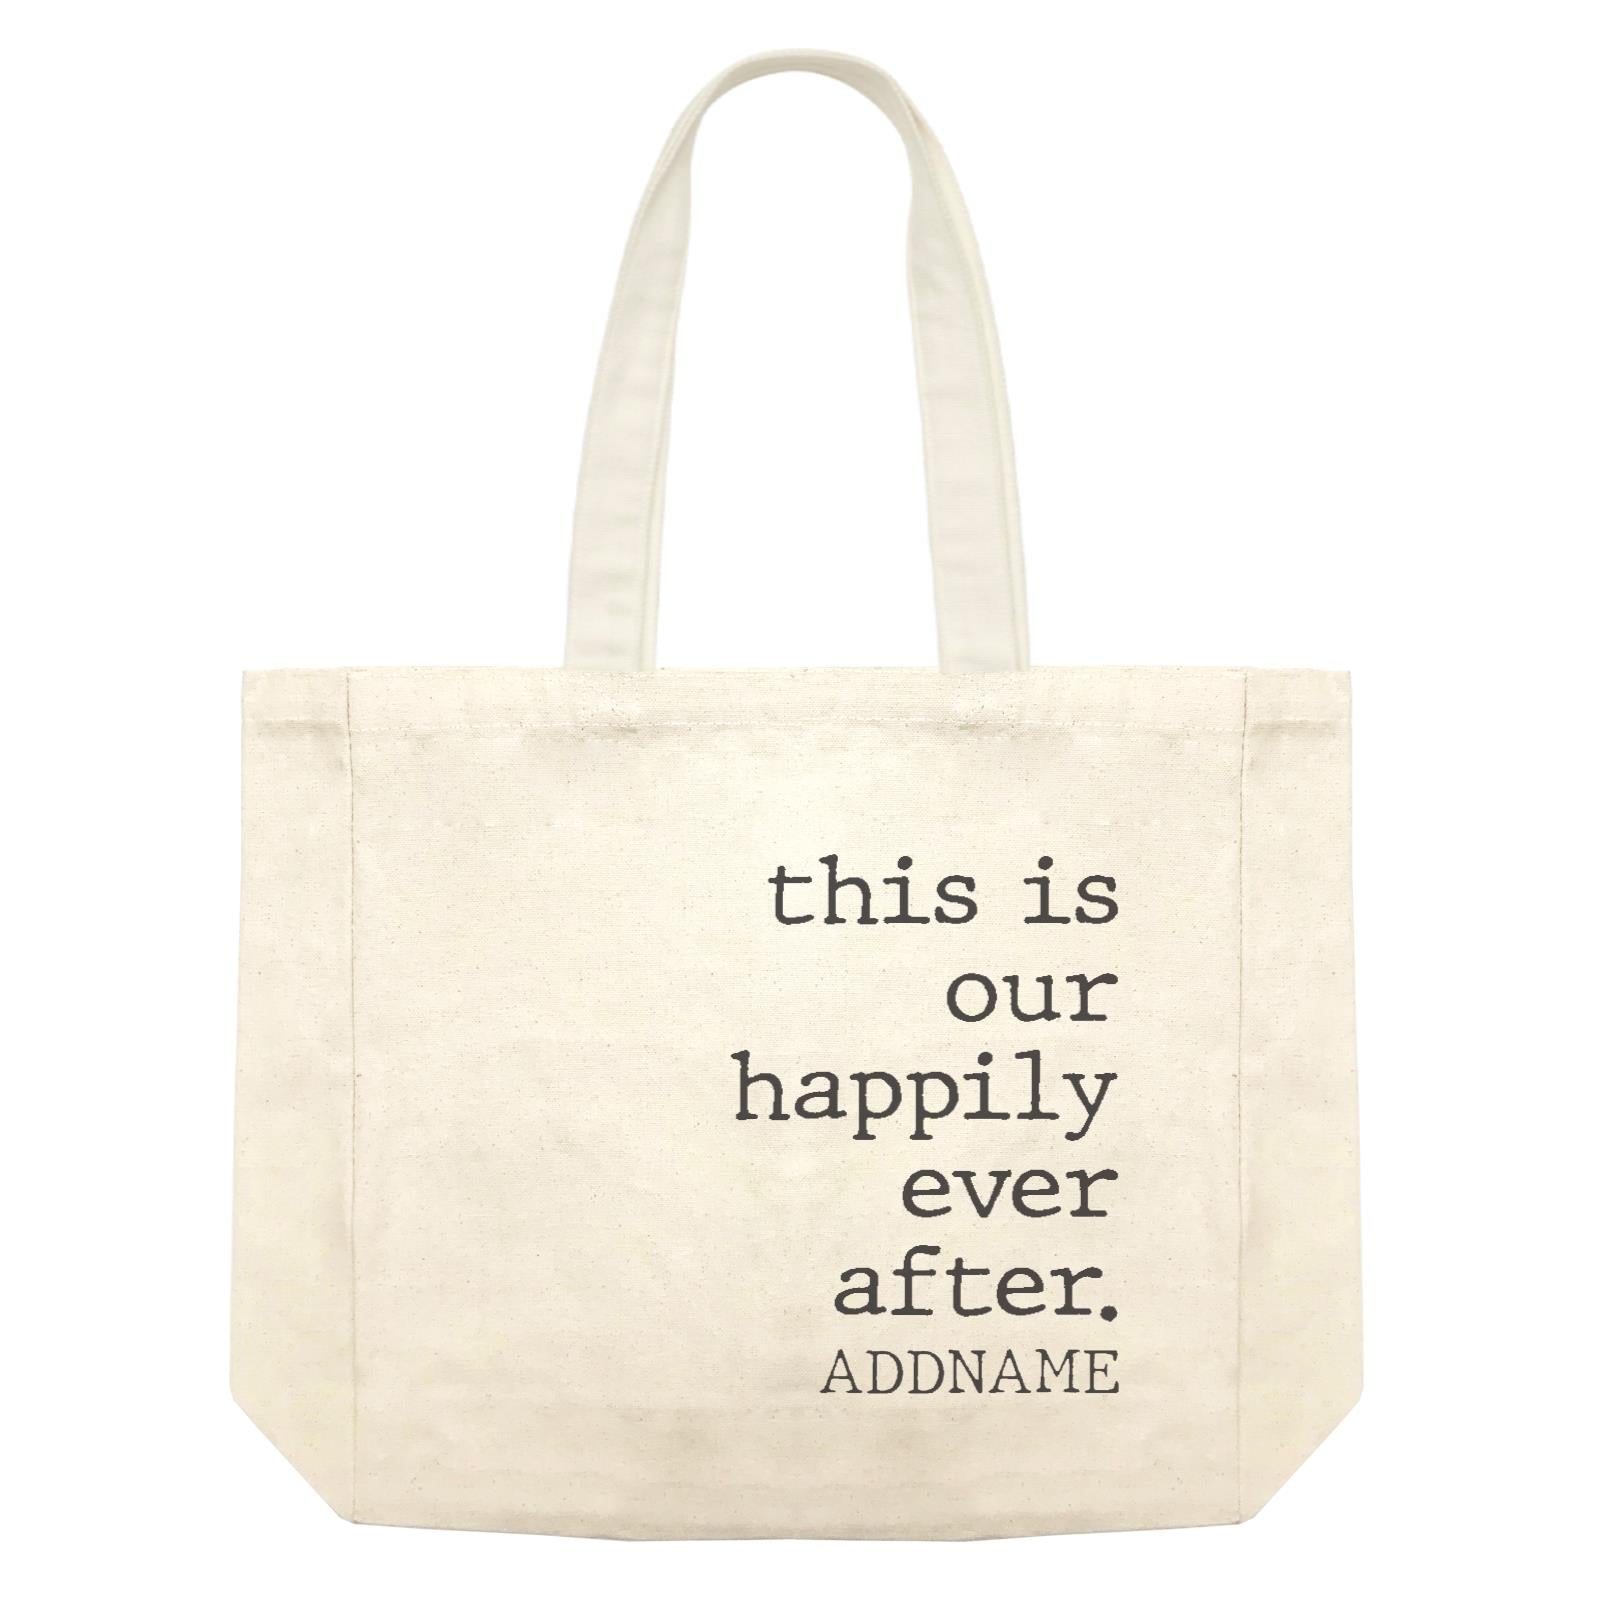 Family Is Everythings Quotes This Is Our Happily Ever After Addame Shopping Bag